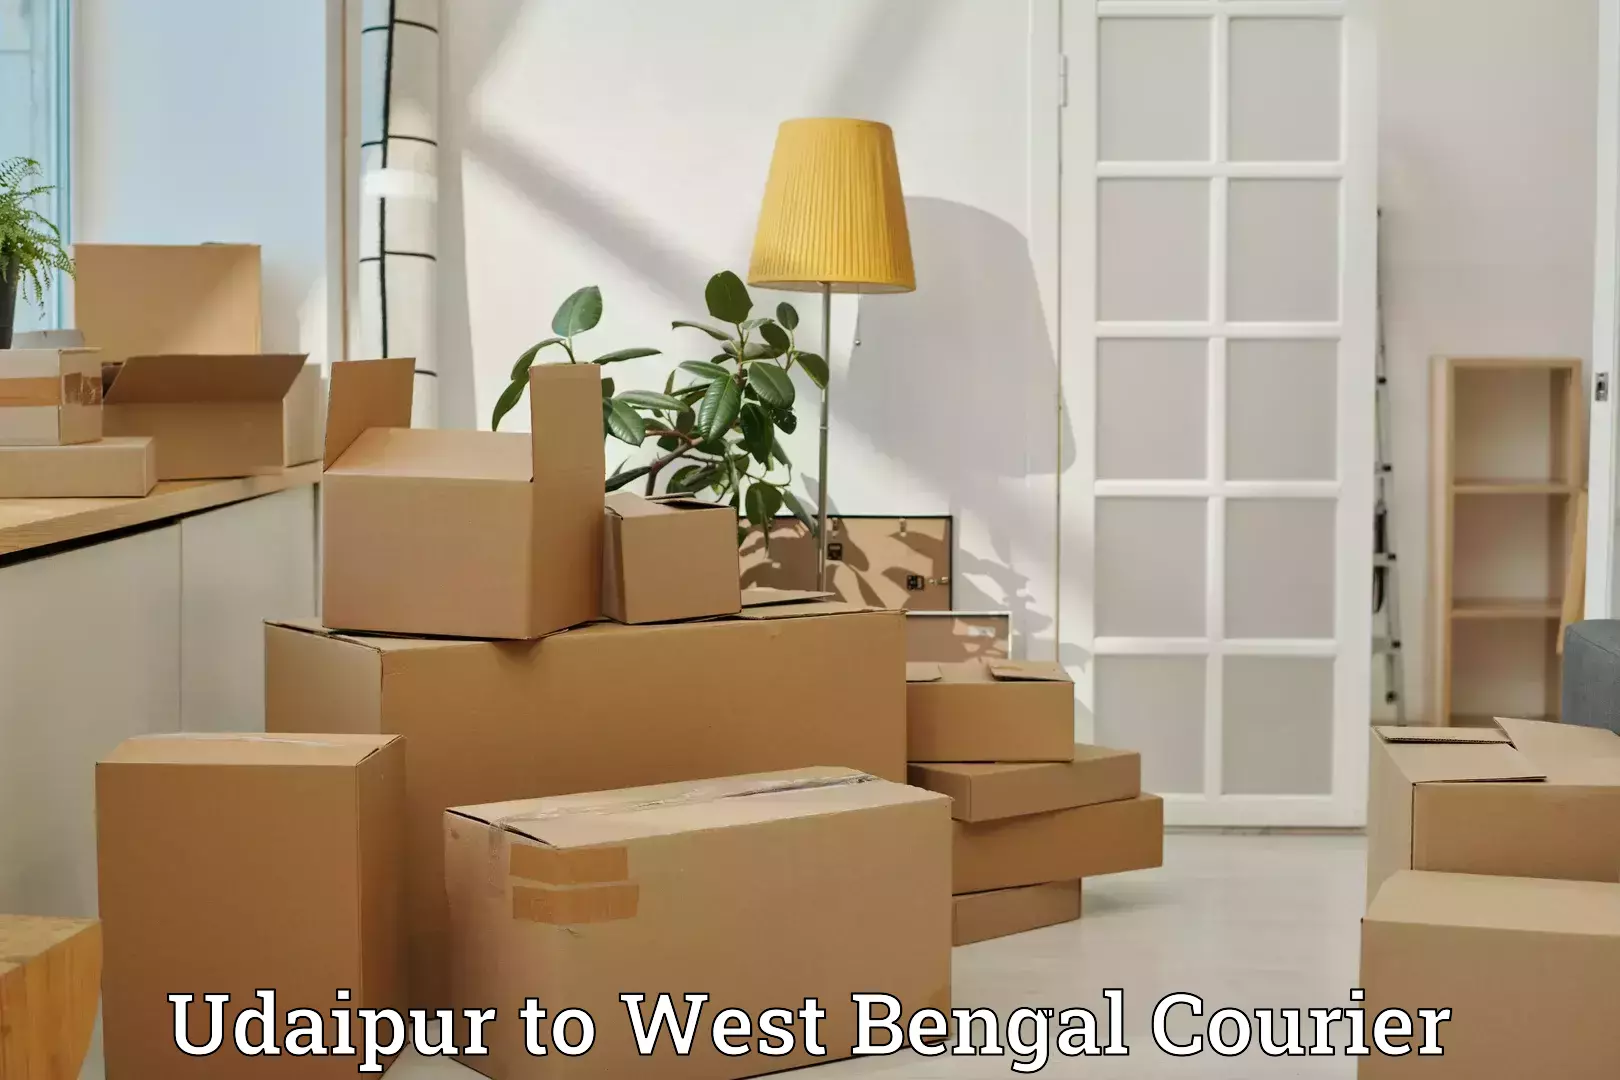 Baggage transport technology Udaipur to West Bengal